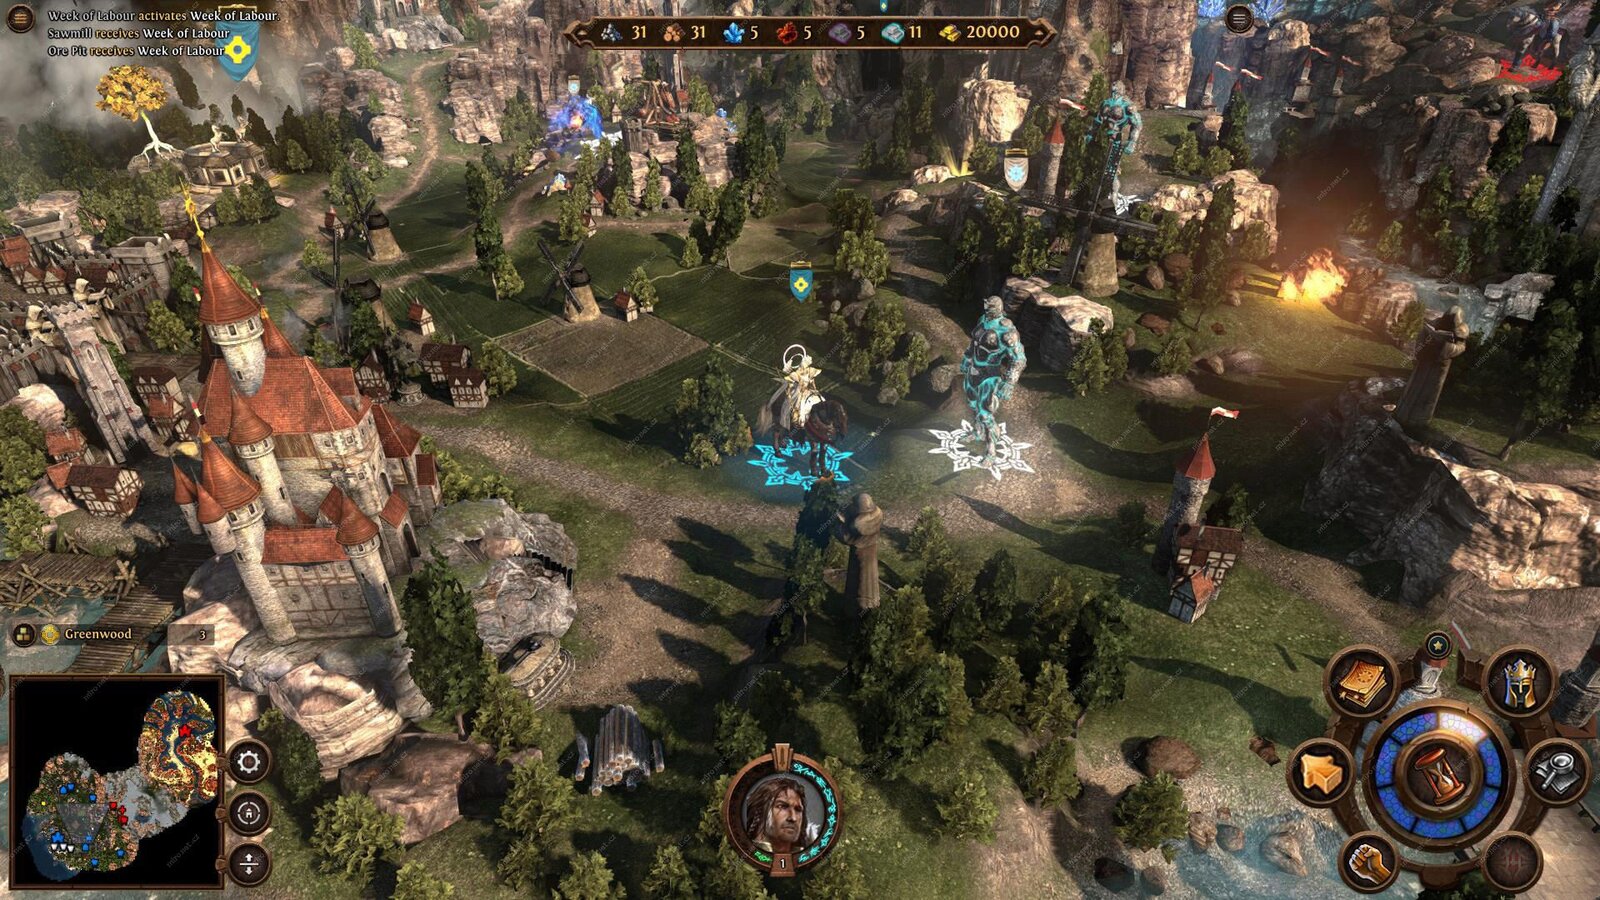 Might and Magic Heroes VII - Complete Edition